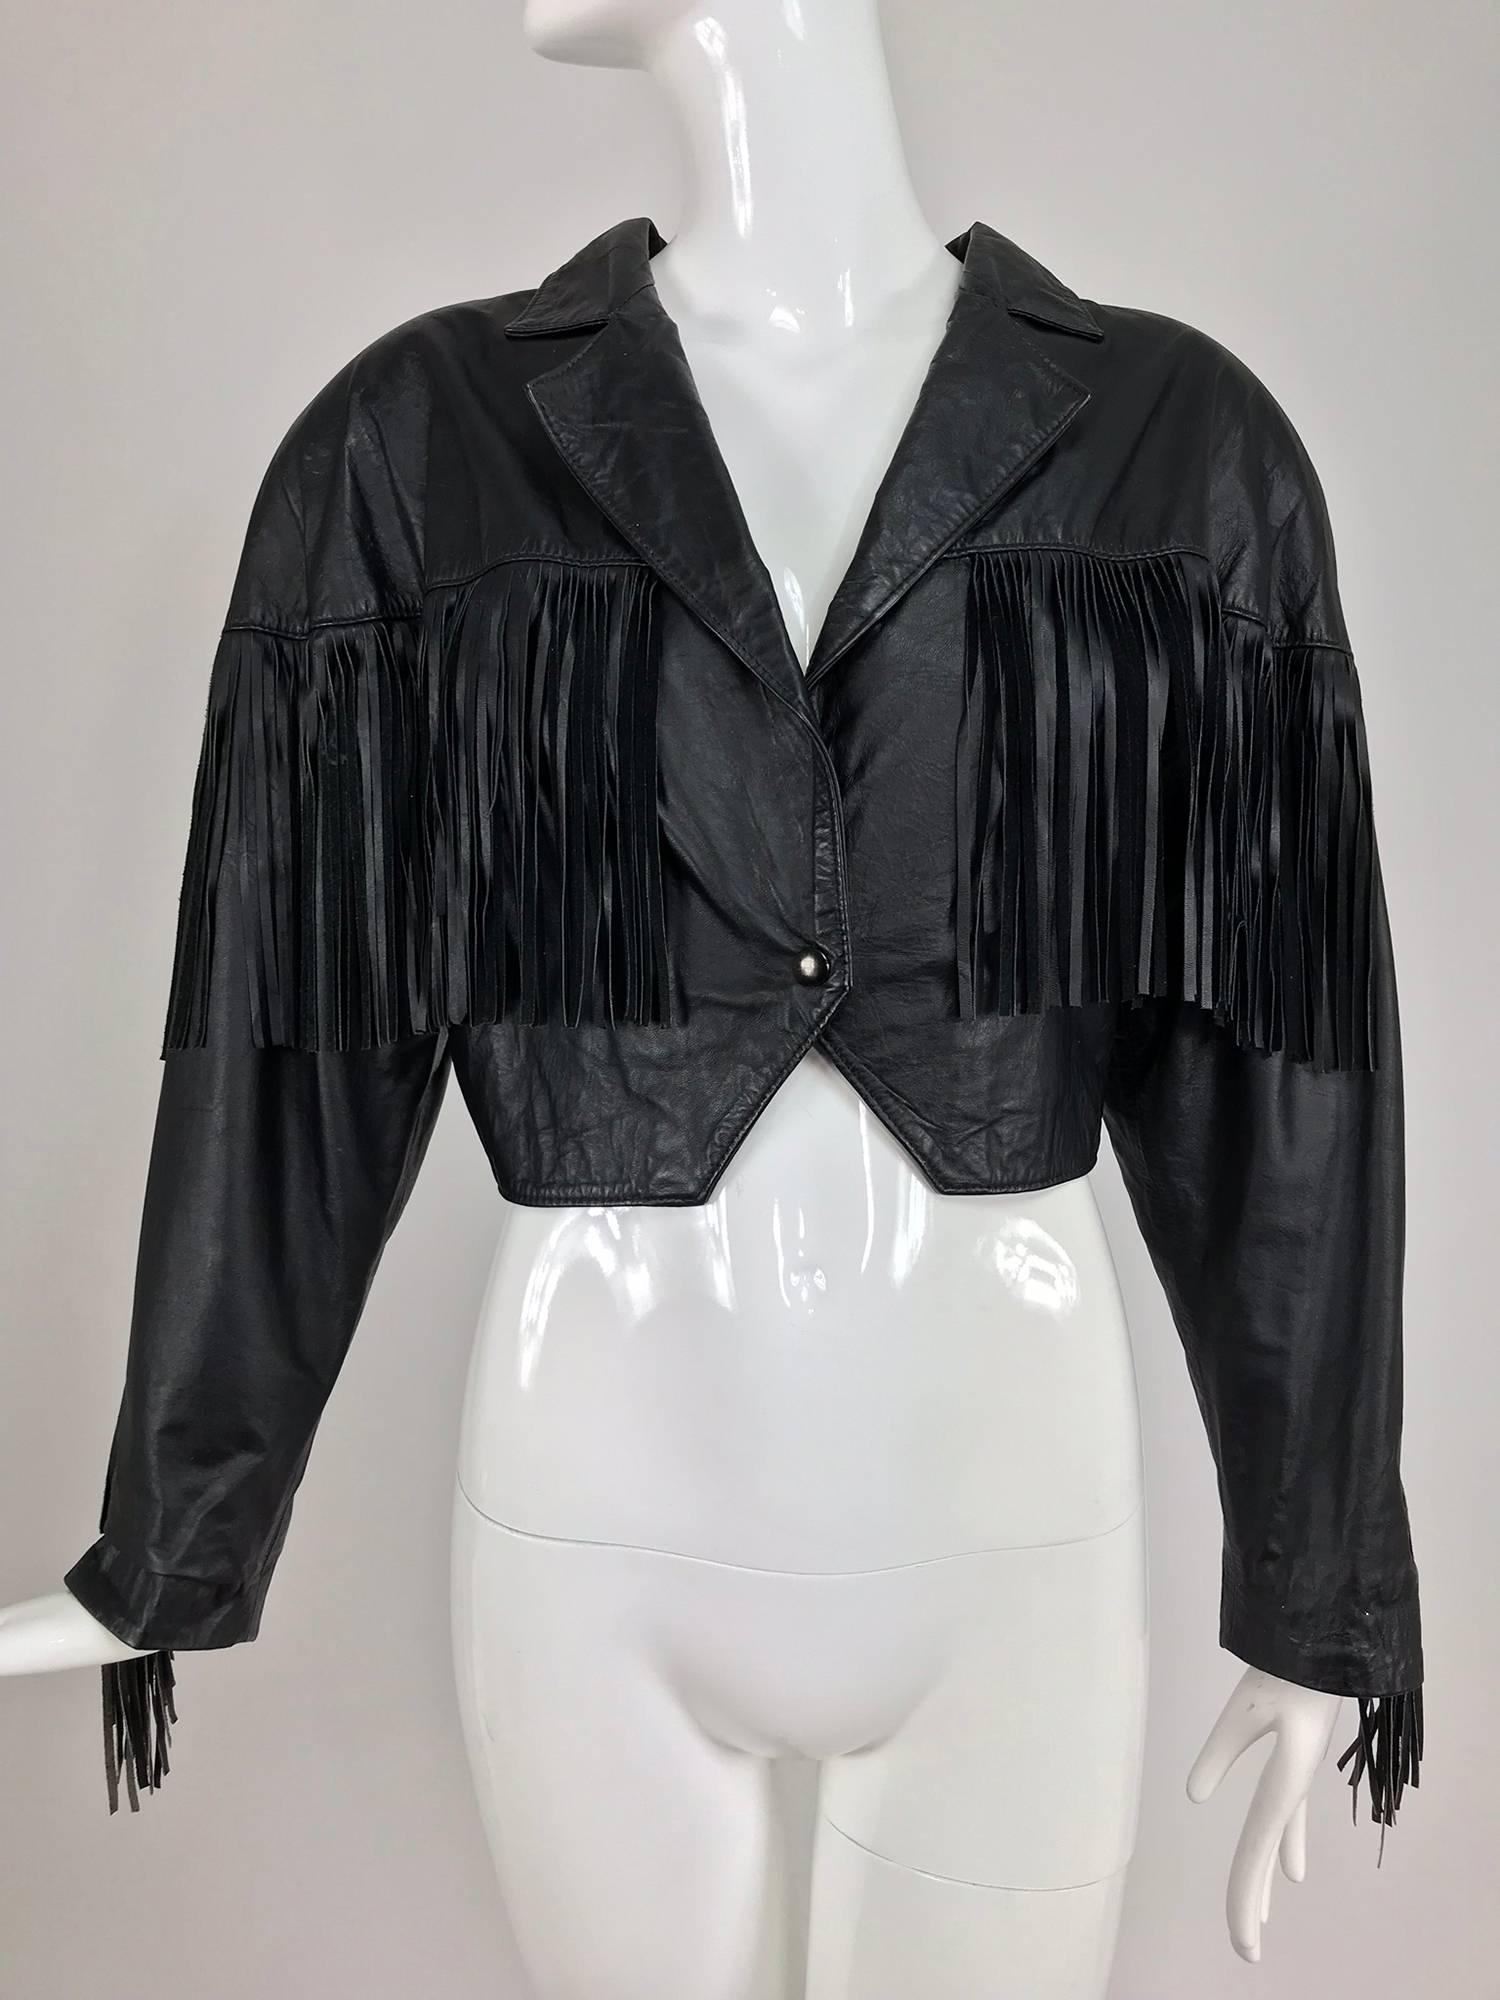 Maziar Betty Boop cowgirl black fringe leather jacket from the 1980s...Cropped jacket with a deep front yoke that is trimmed in long black leather fringe, the fringe continues around the arm and runs down the arm to the wrist...Notched lapels,